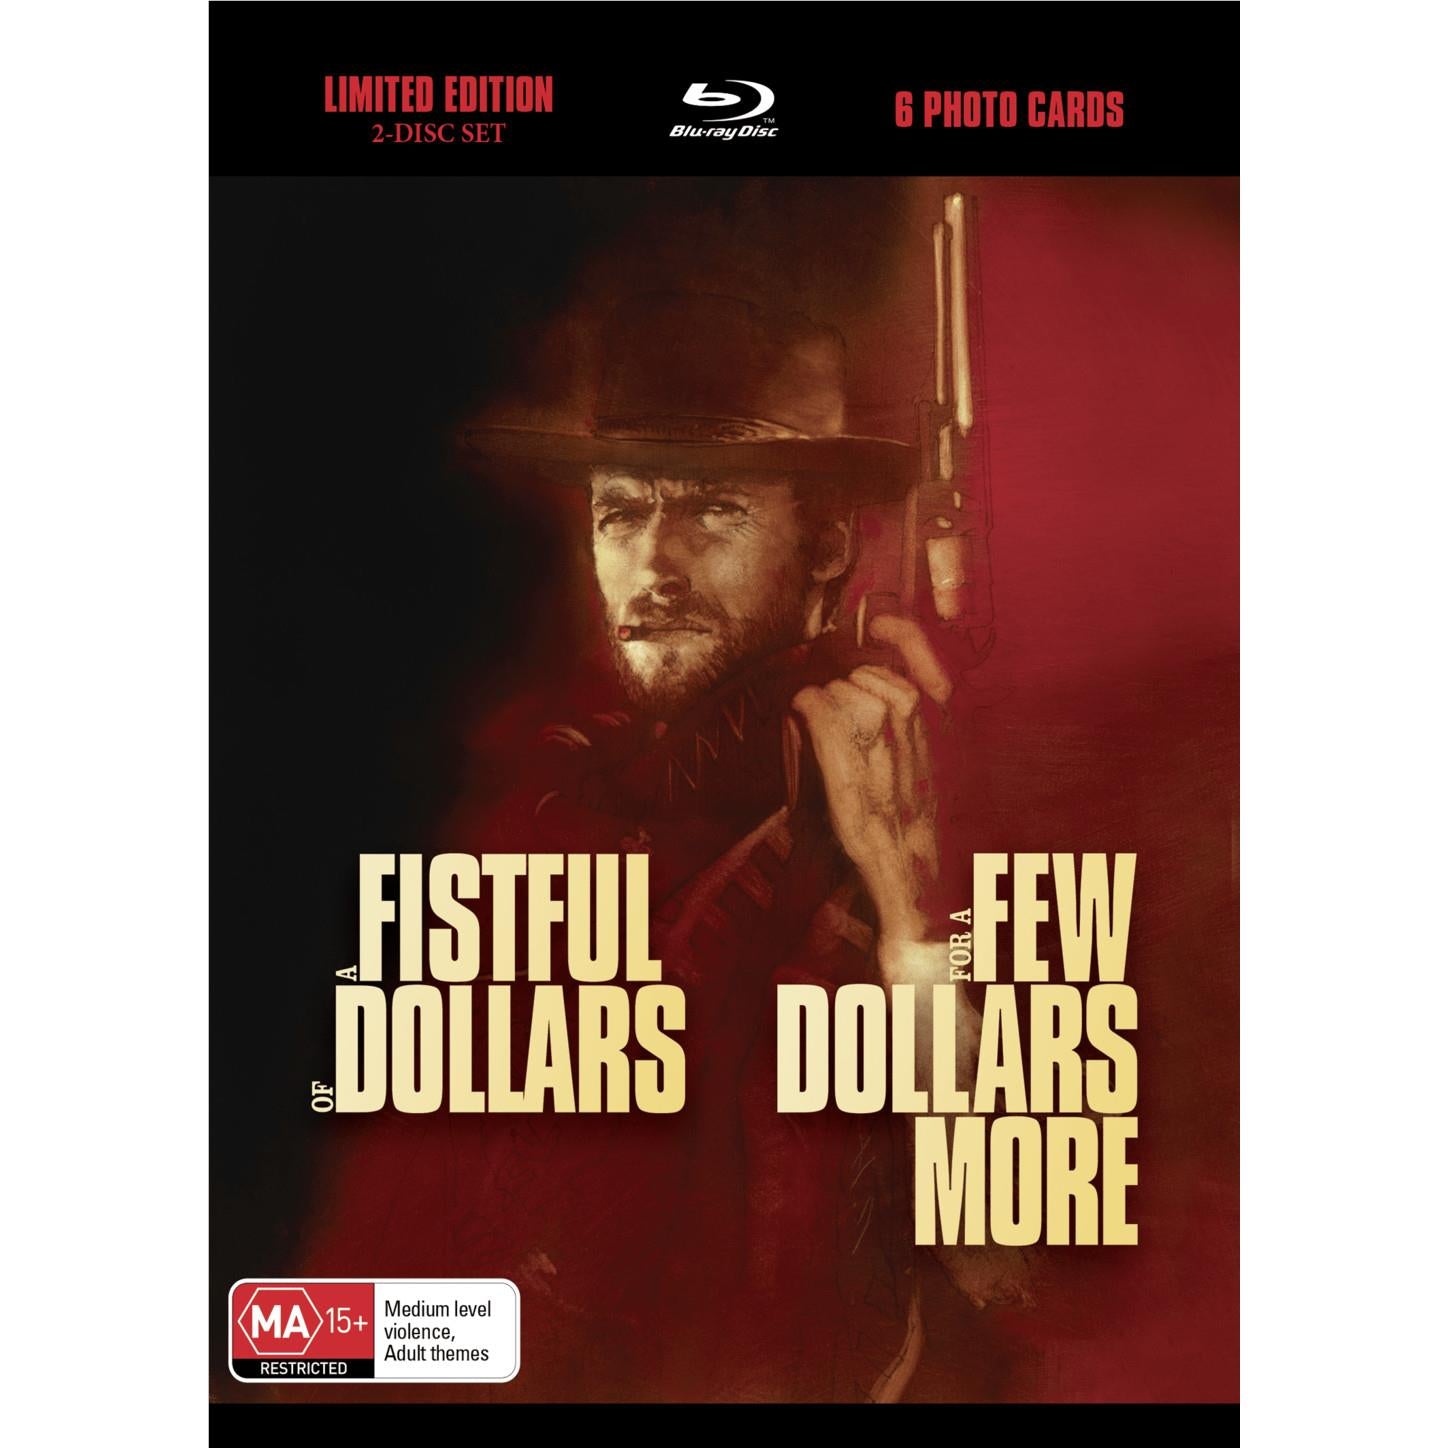 fistful of dollars, a / for a few dollars more - limited edition